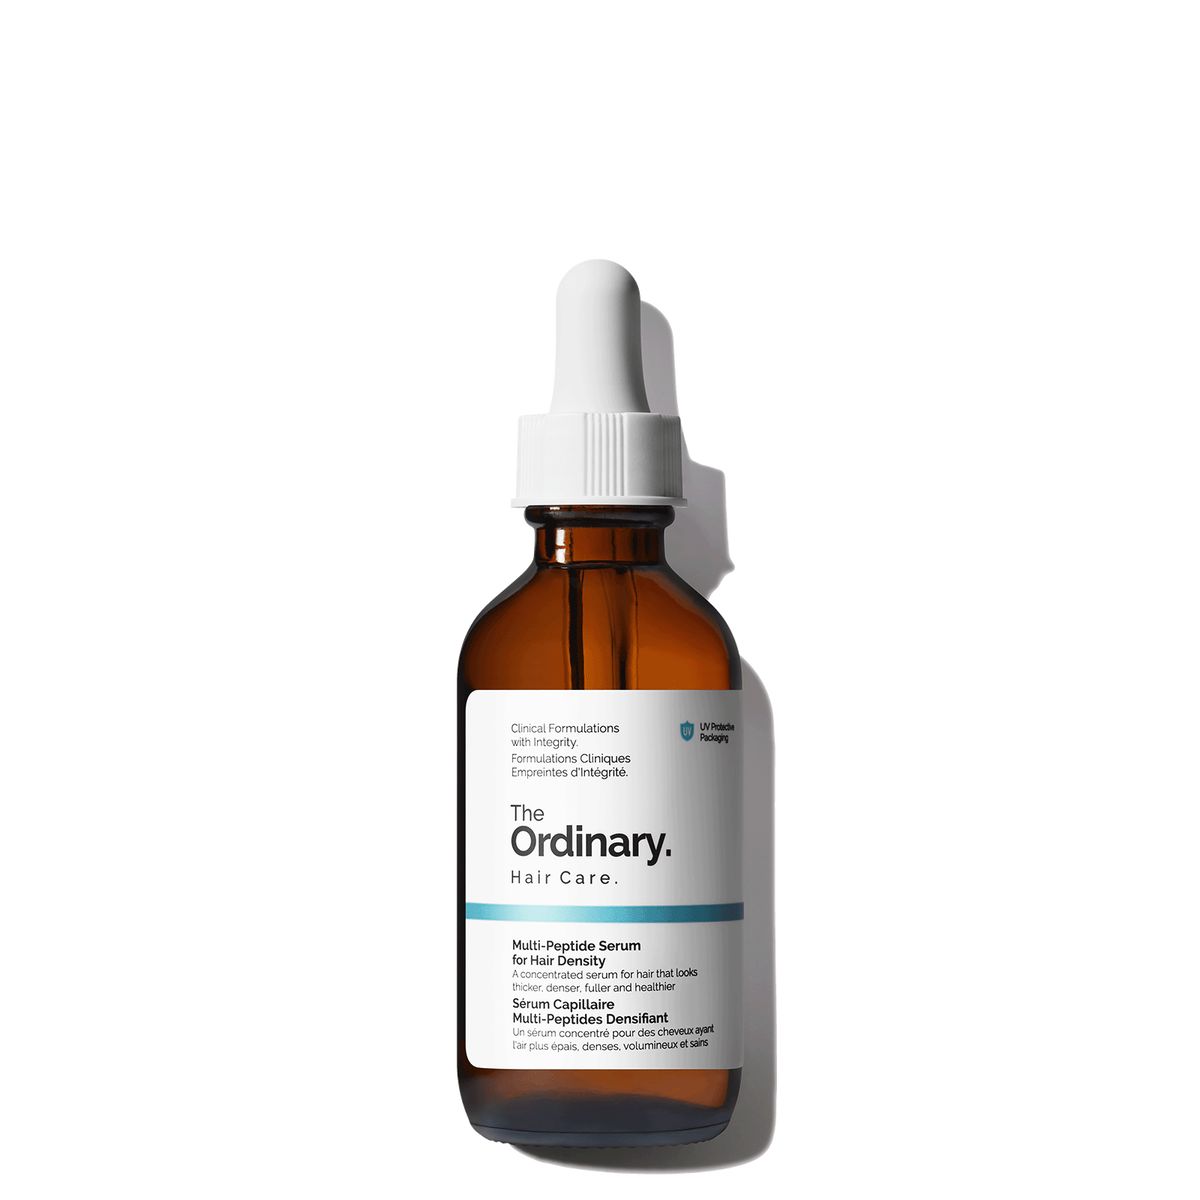 The Ordinary Multi-Peptide Serum for Hair DensityMulti-Peptide Serum for Hair Density | The Ordinary